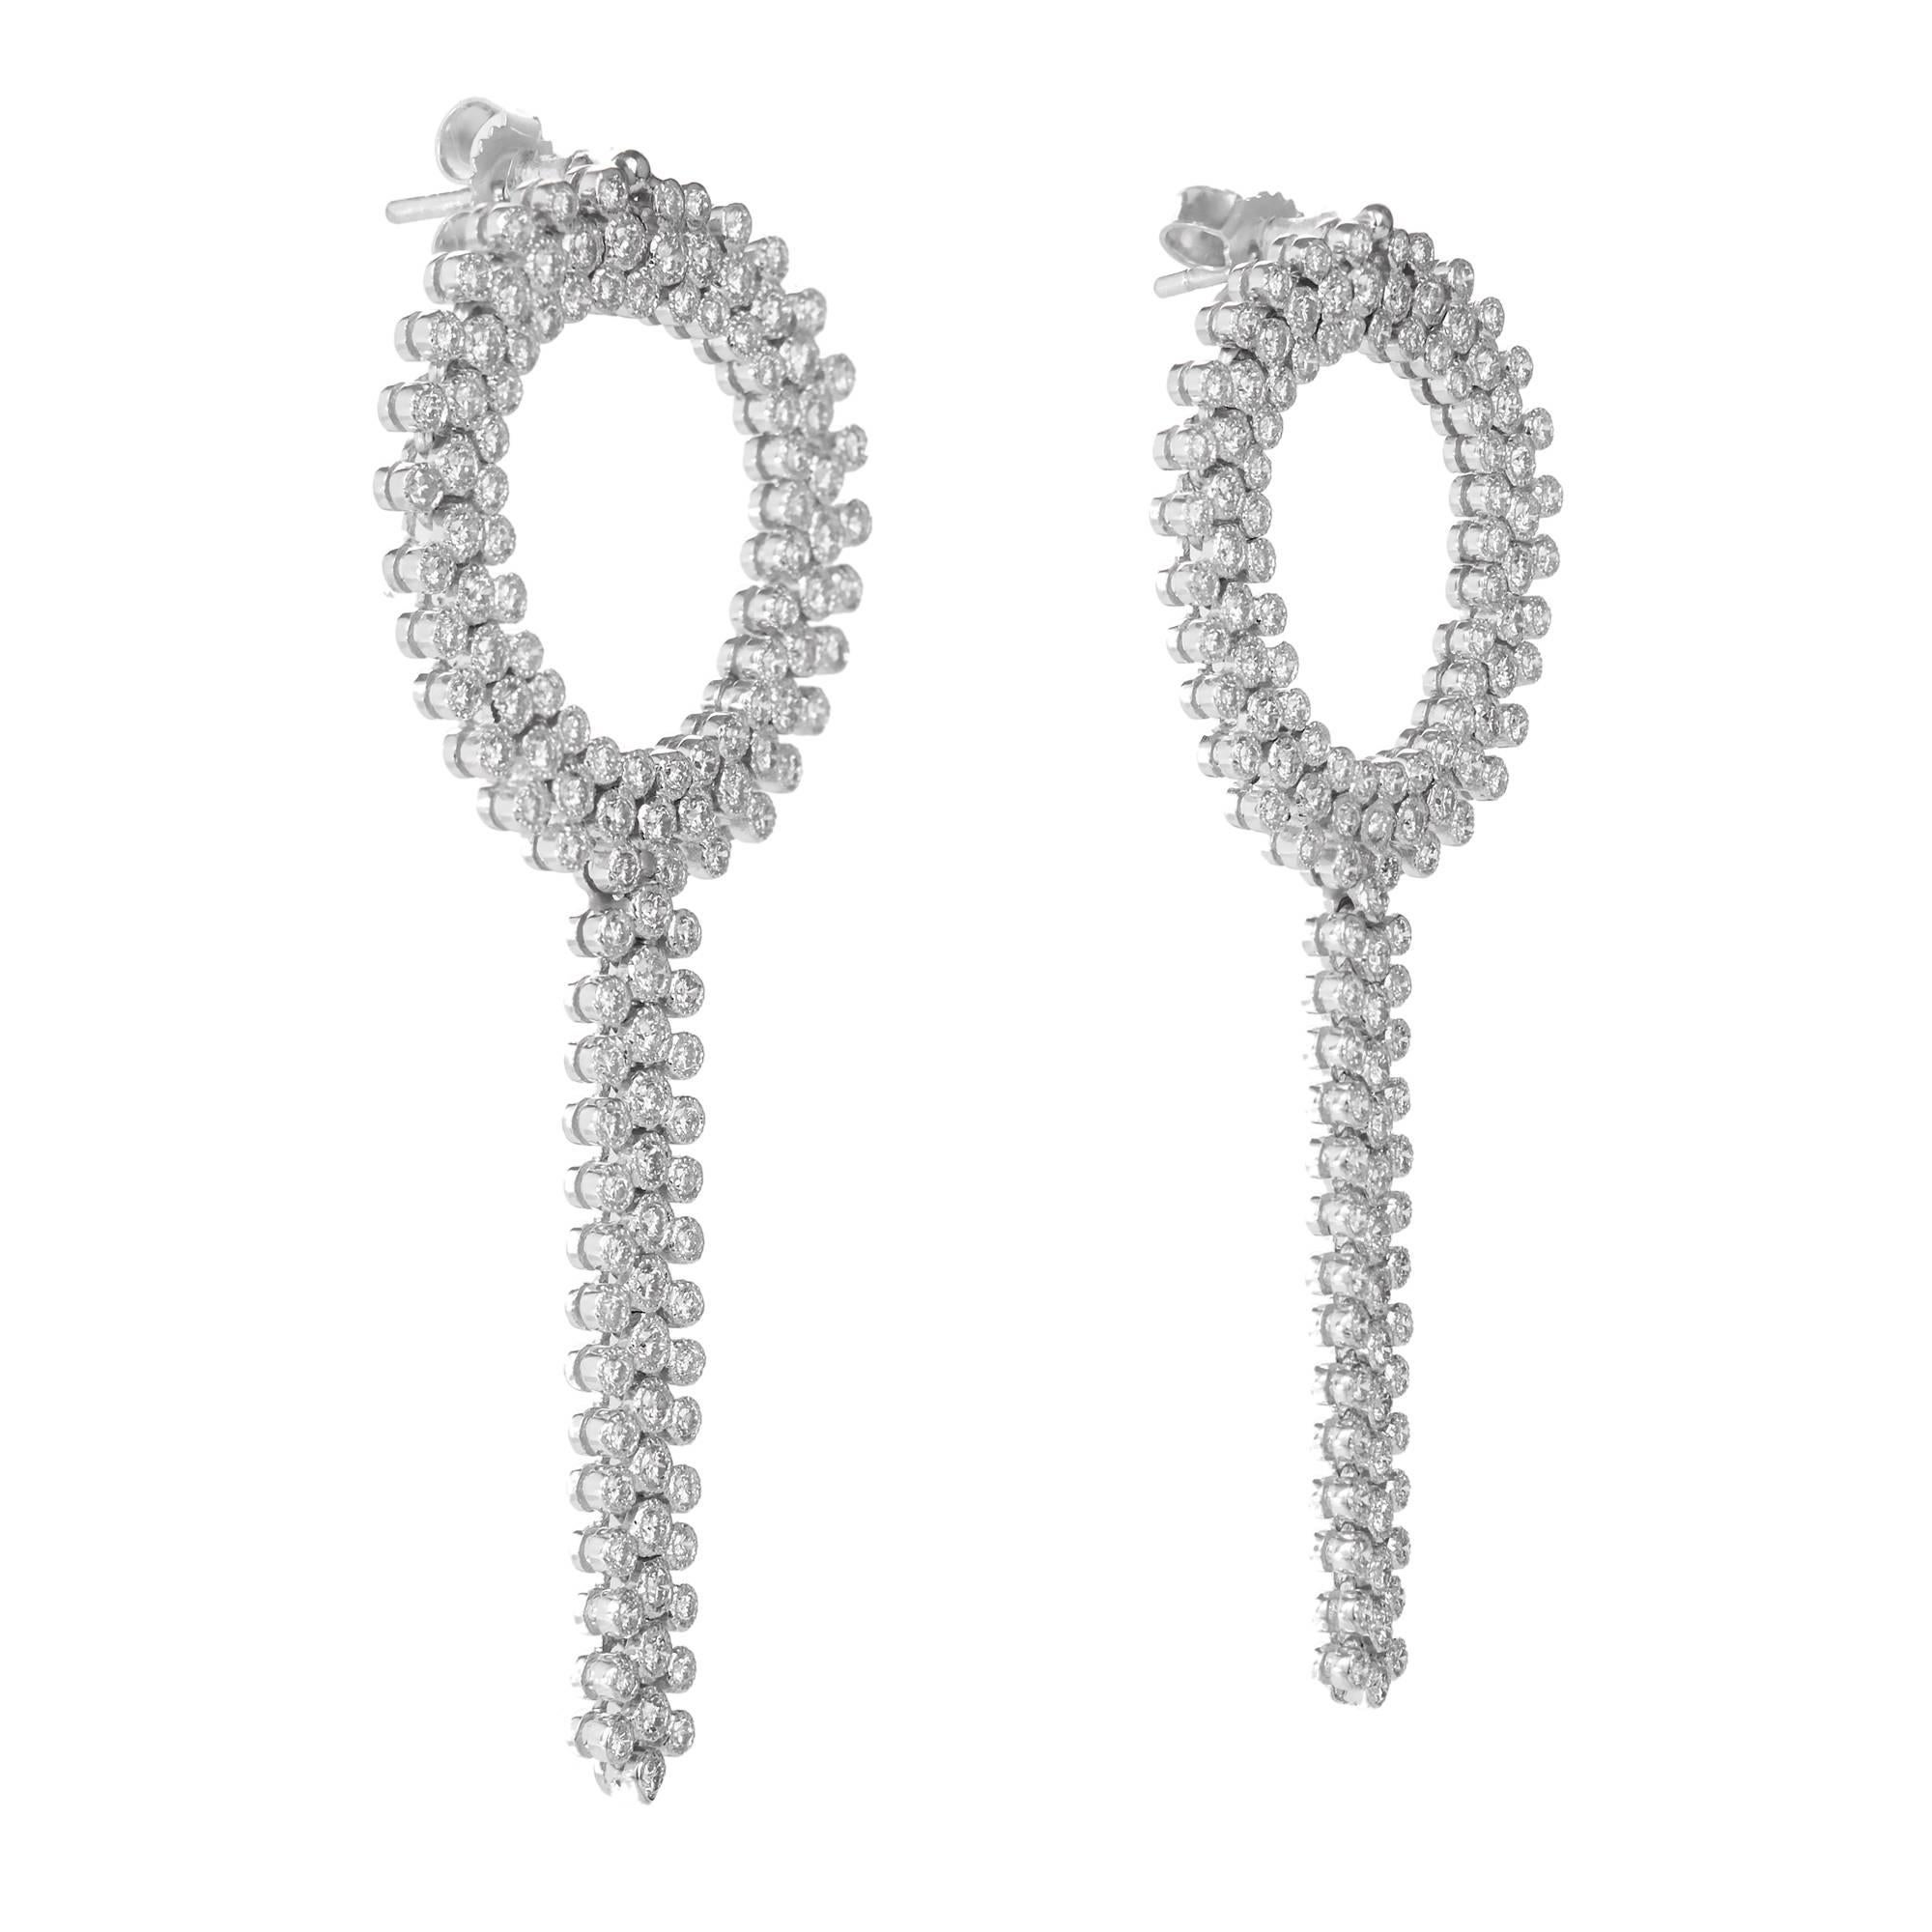 1960’s dangle earrings with individual tube set diamonds hinged together to form a circle with a tassel dangle. Soft flowing movement. 

254 round full cut diamonds G VS2 SI approximately 1.40 carat
8.7 Grams
14k White Gold
Tested: 14k
Earring backs